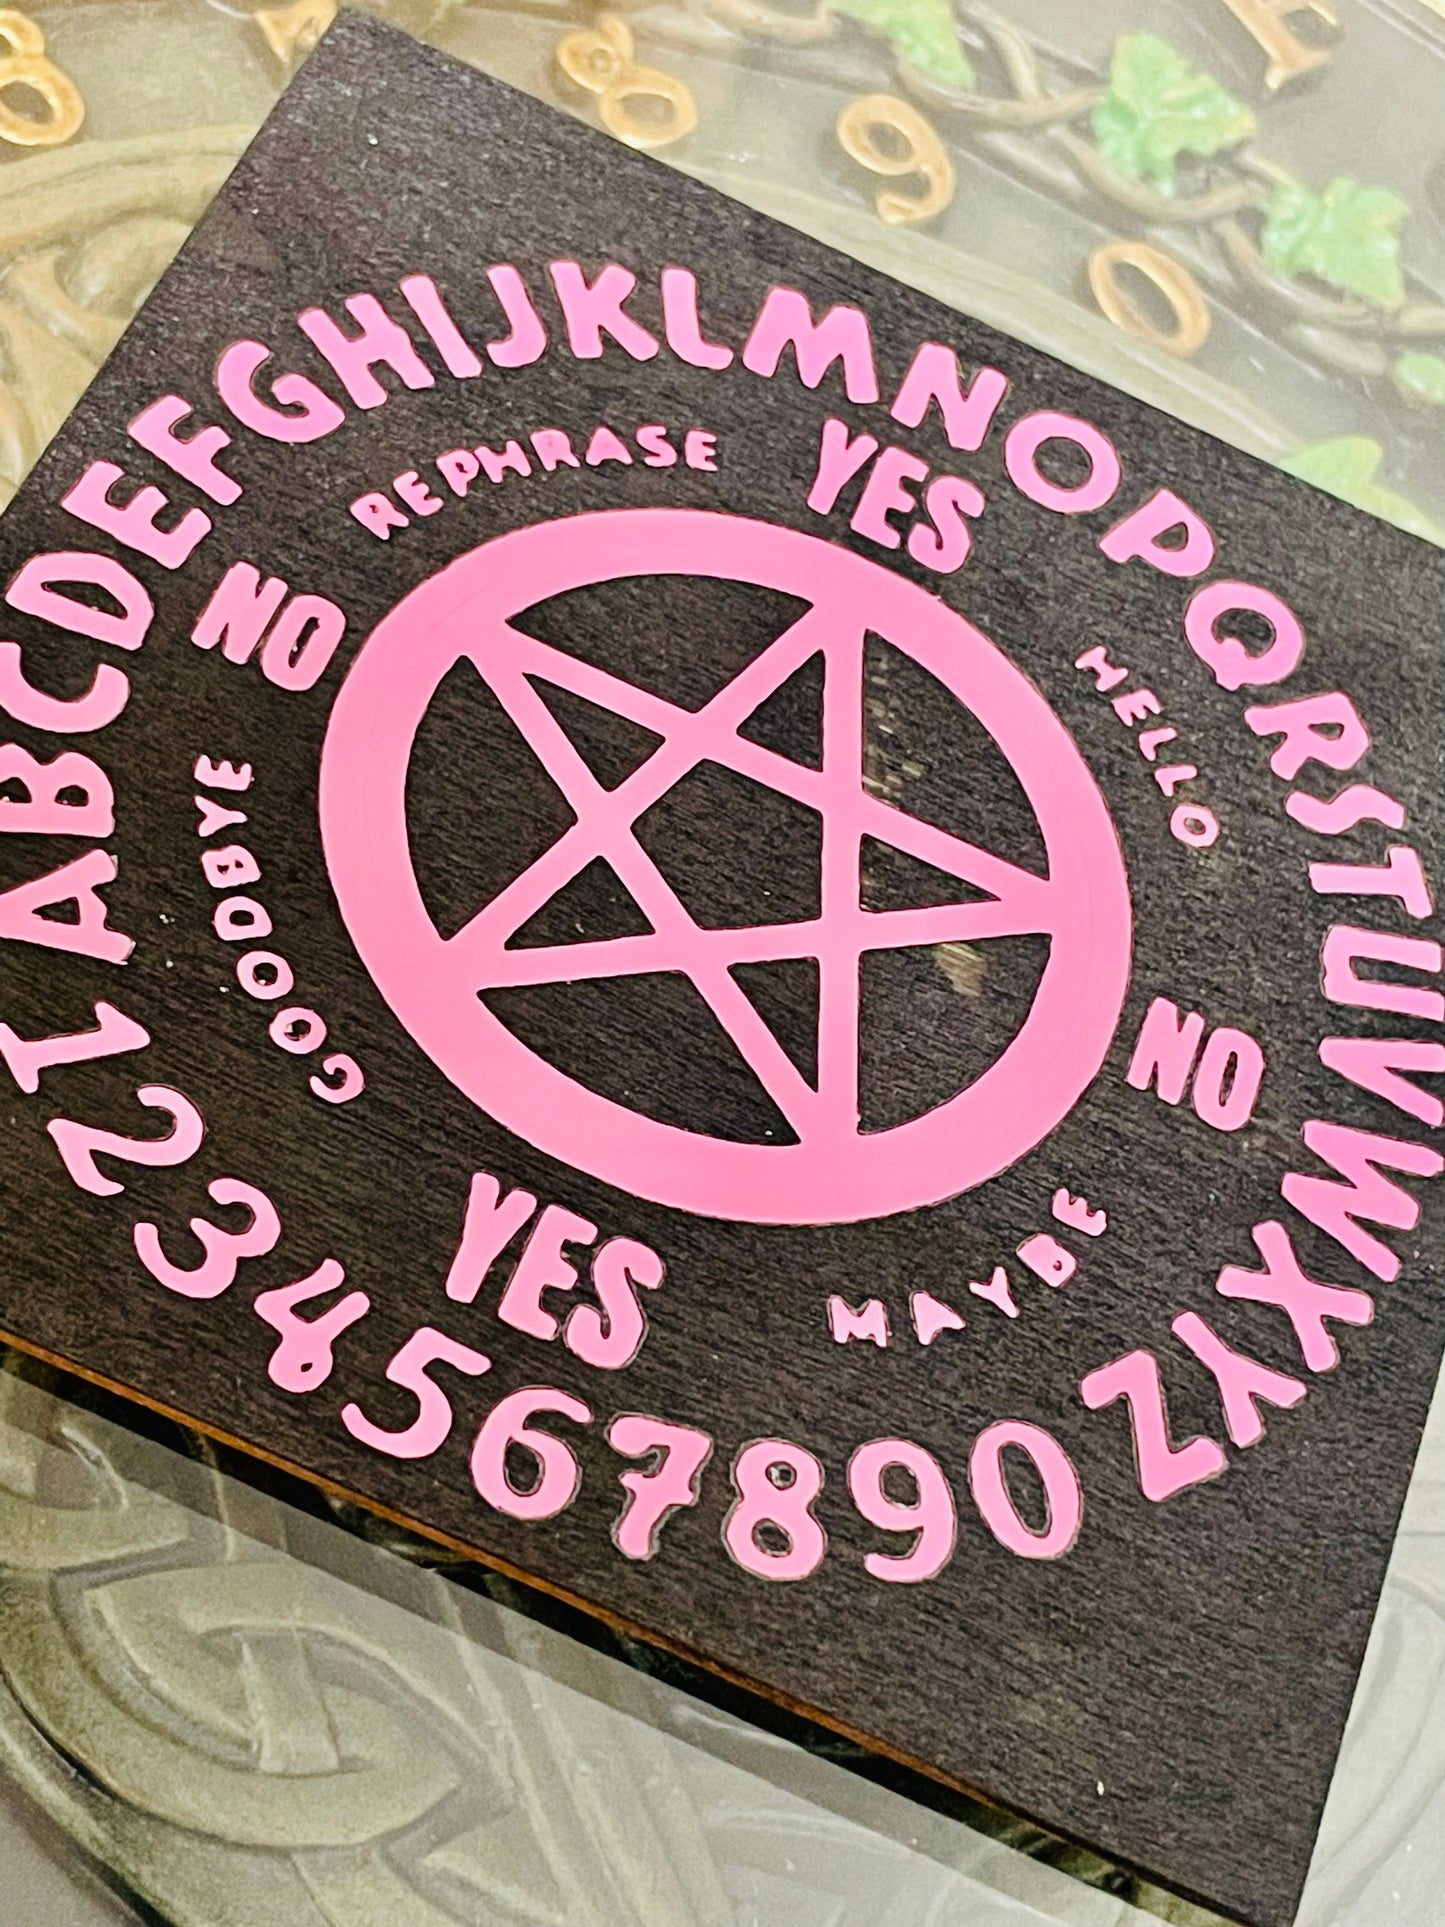 Pendulum Board #1, 4x4 inches, SQUARE, Wood - Vinyl - Acrylic Paint - Handmade - Pink Letters - Choose Background Color